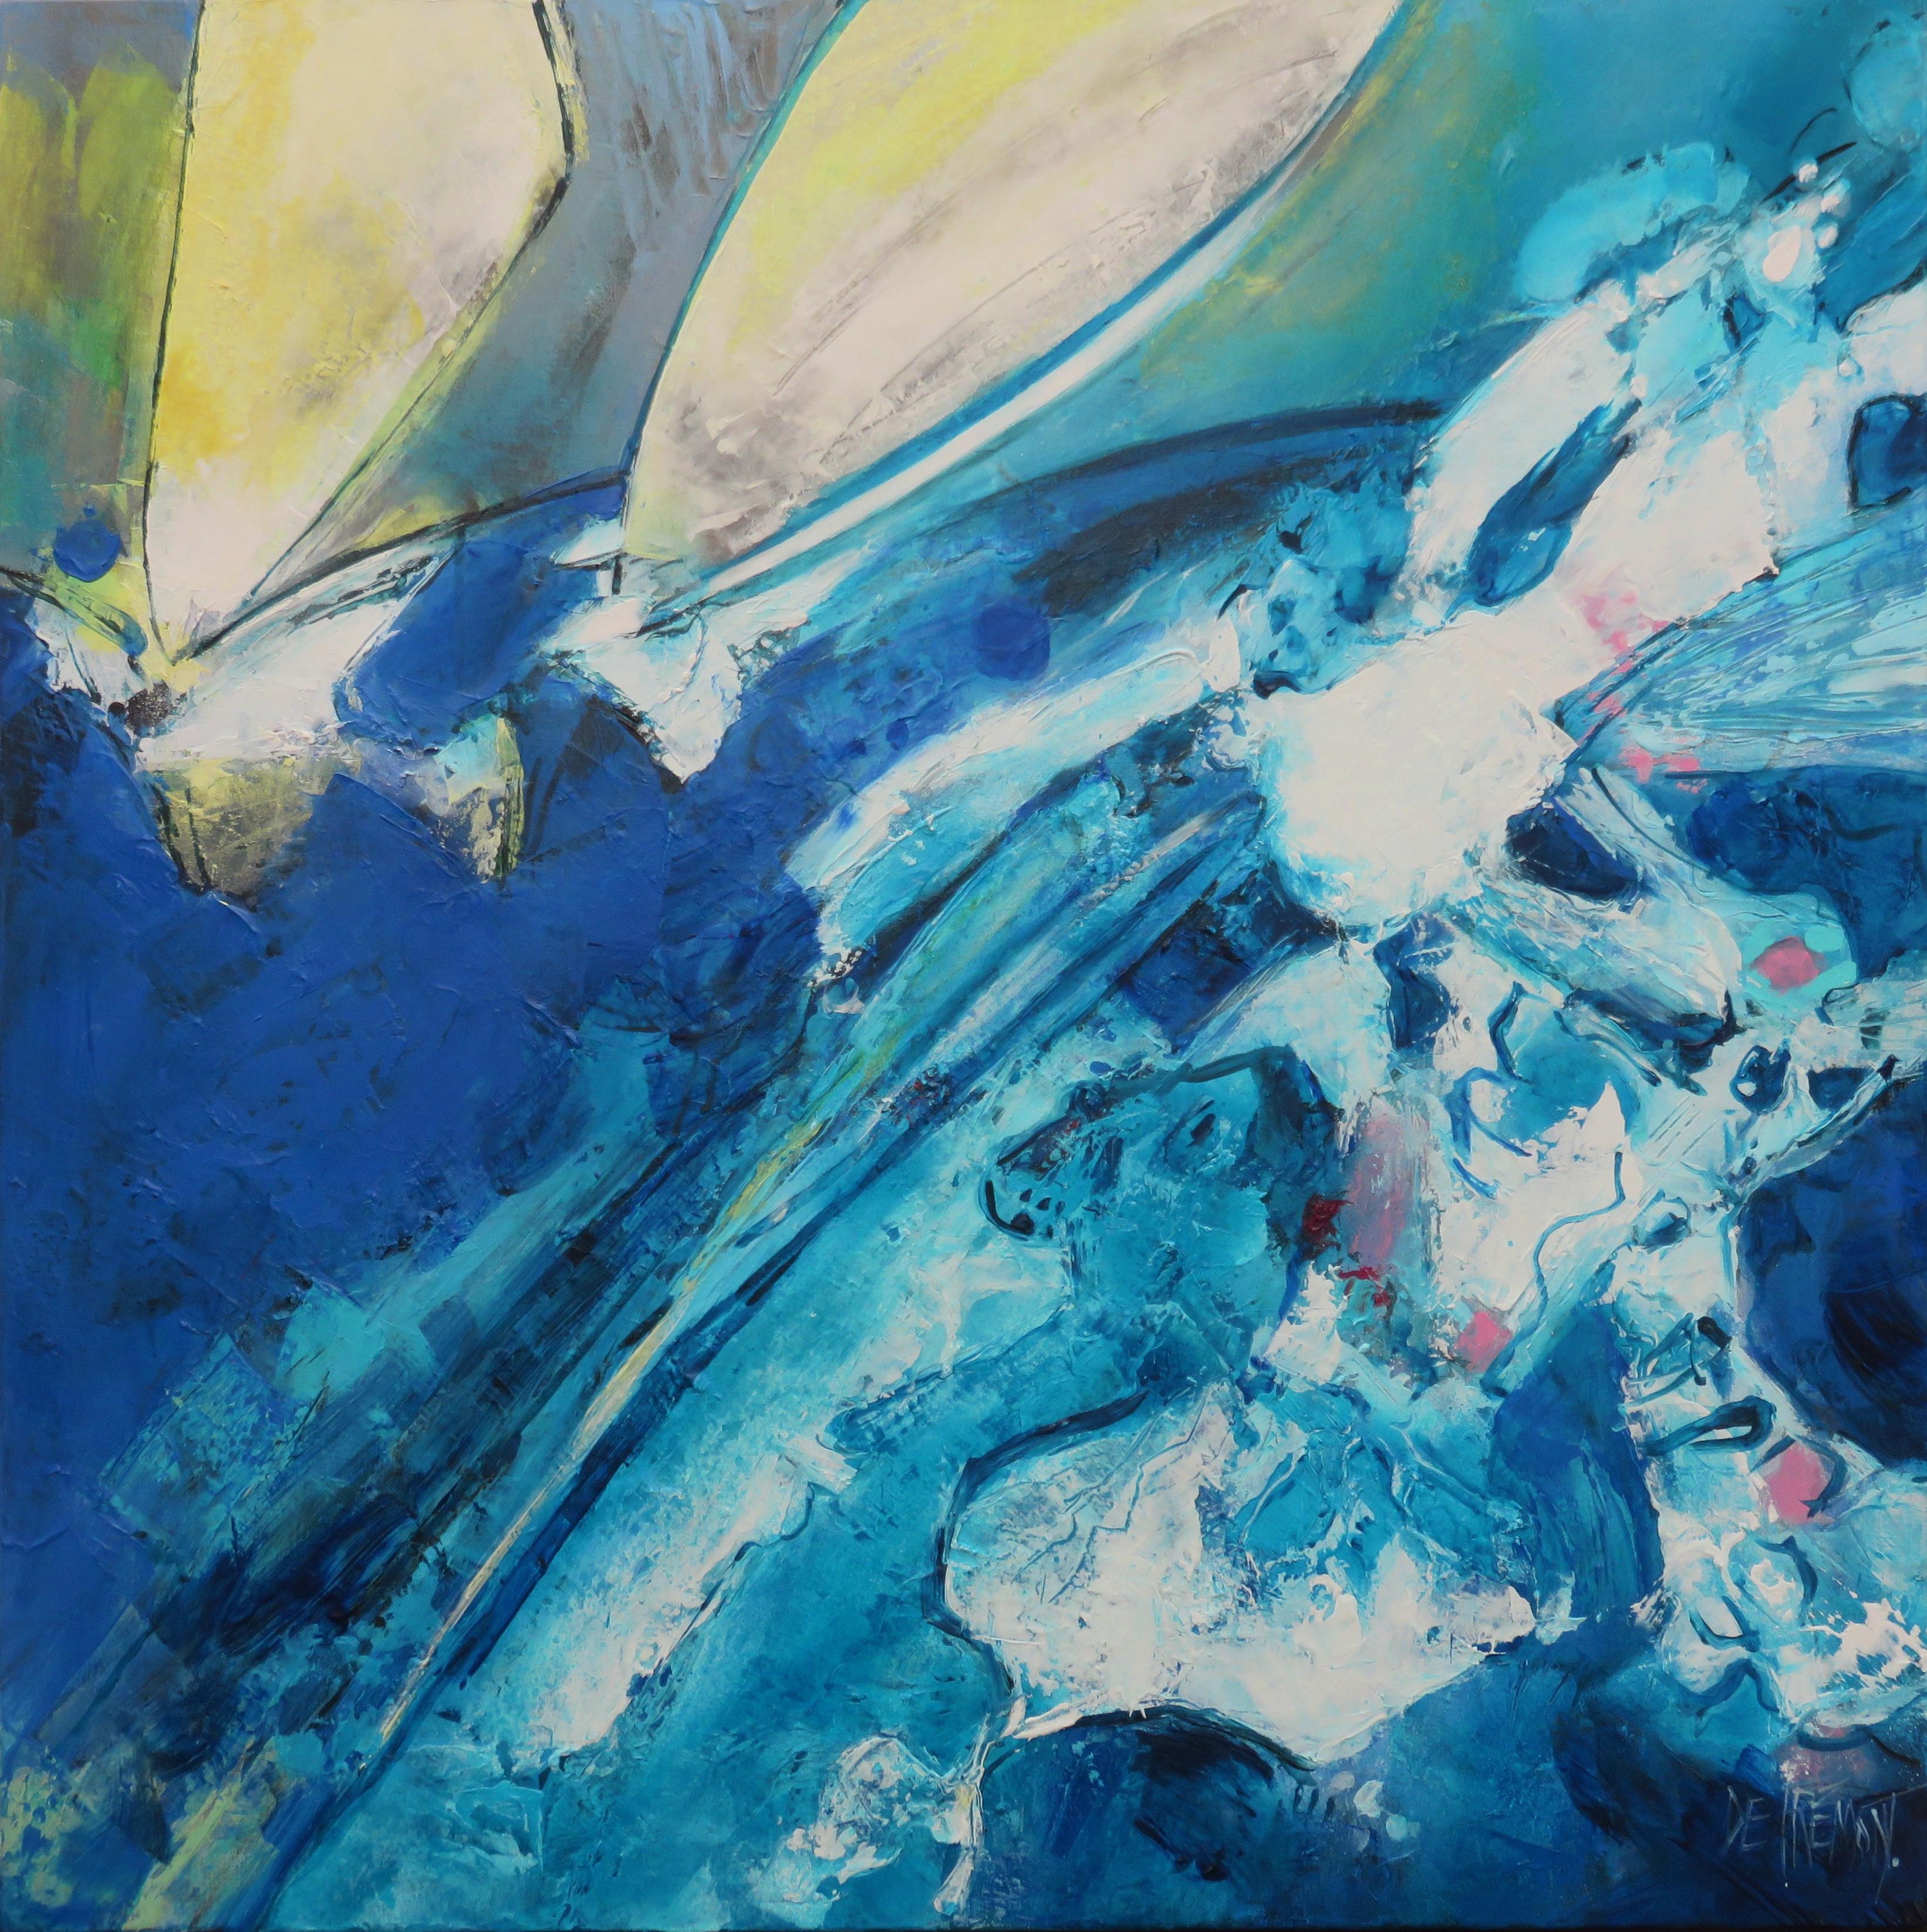 "Windsurf", Aniseed Sails on a Large Wave Mixed Media Oil Painting